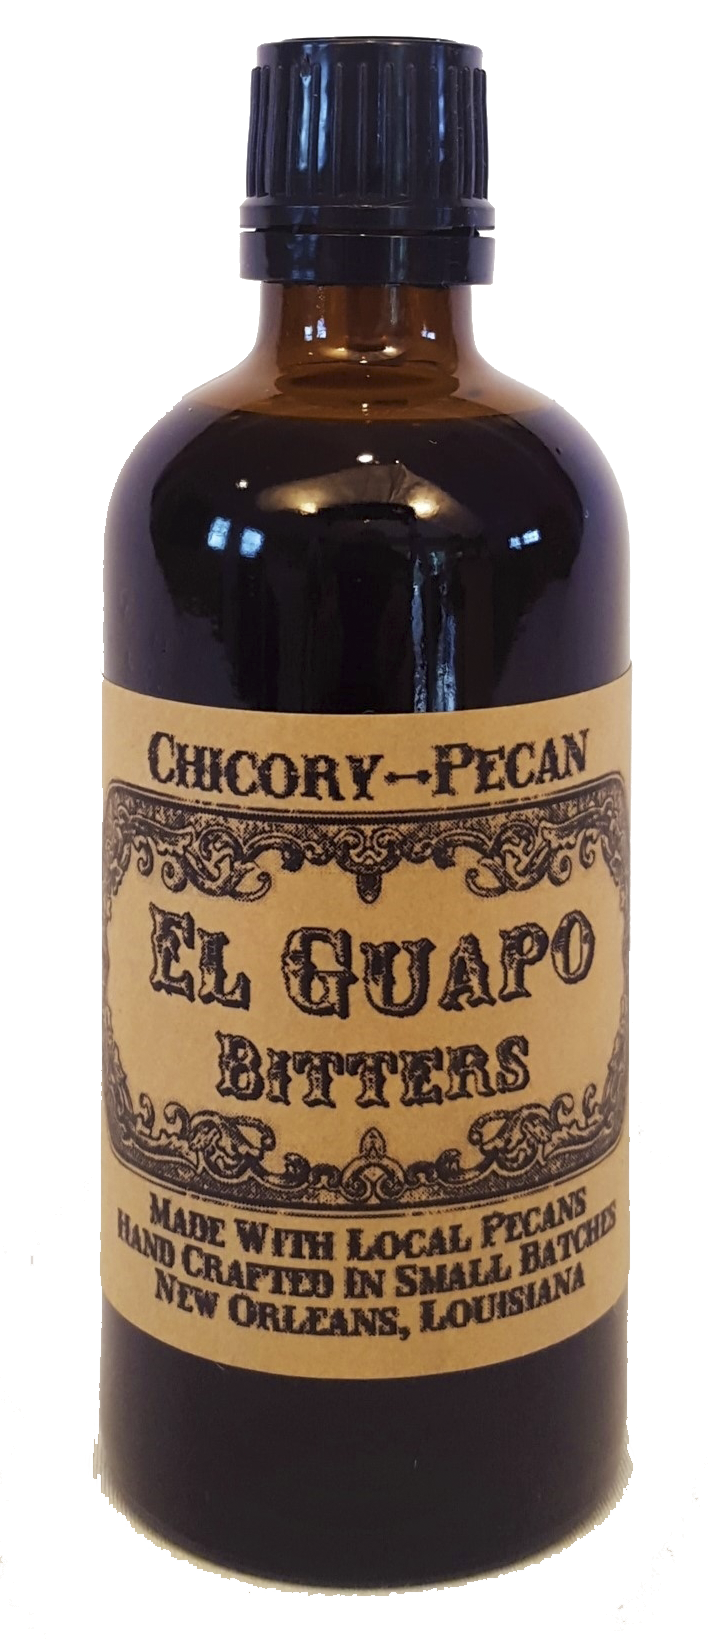 El Guapo chicory-pecan bitters distributed by Samoras Fine Foods for your culinary and cocktail applications.png